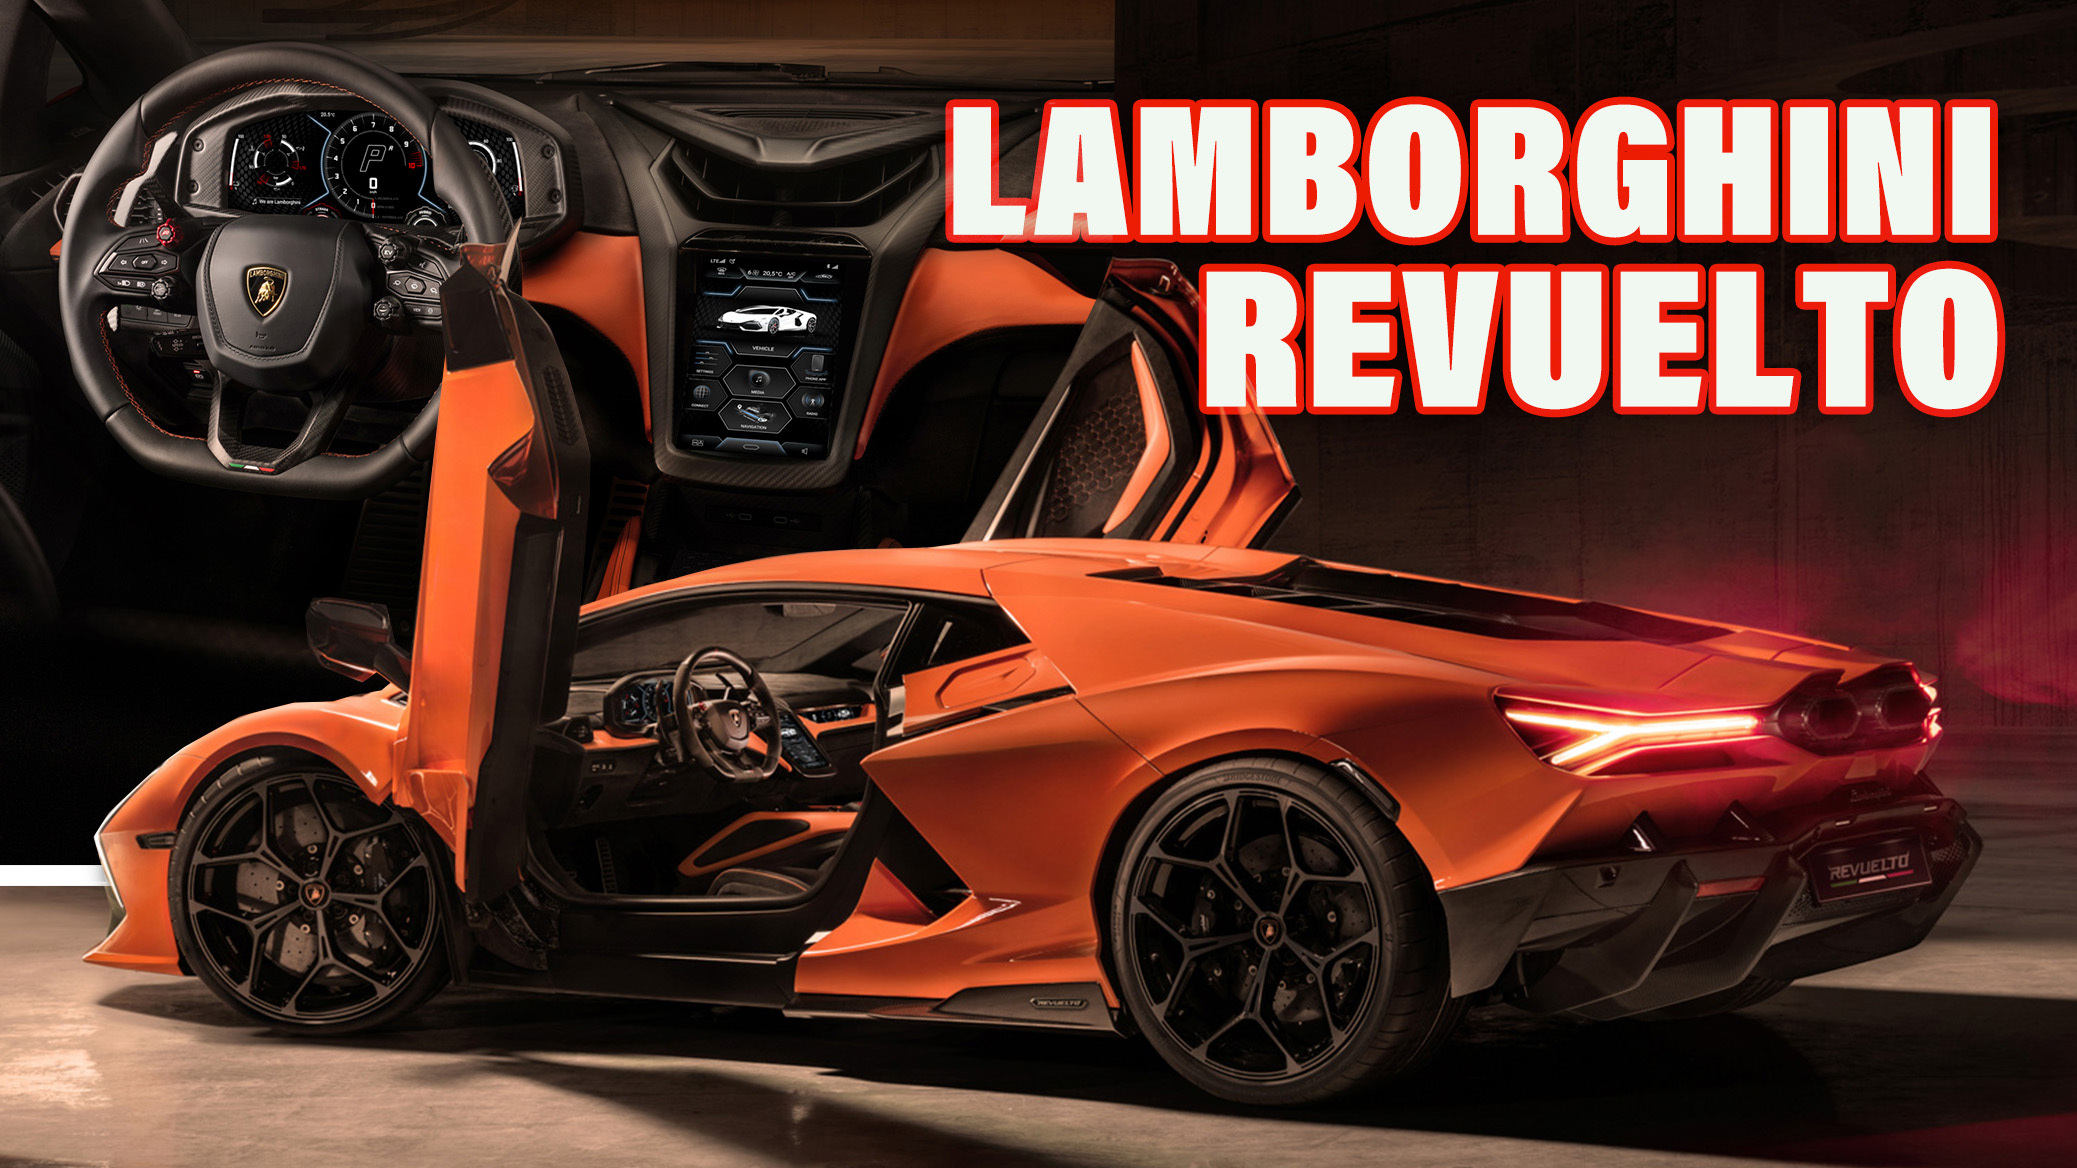 Lamborghini has finally launched its first hybrid